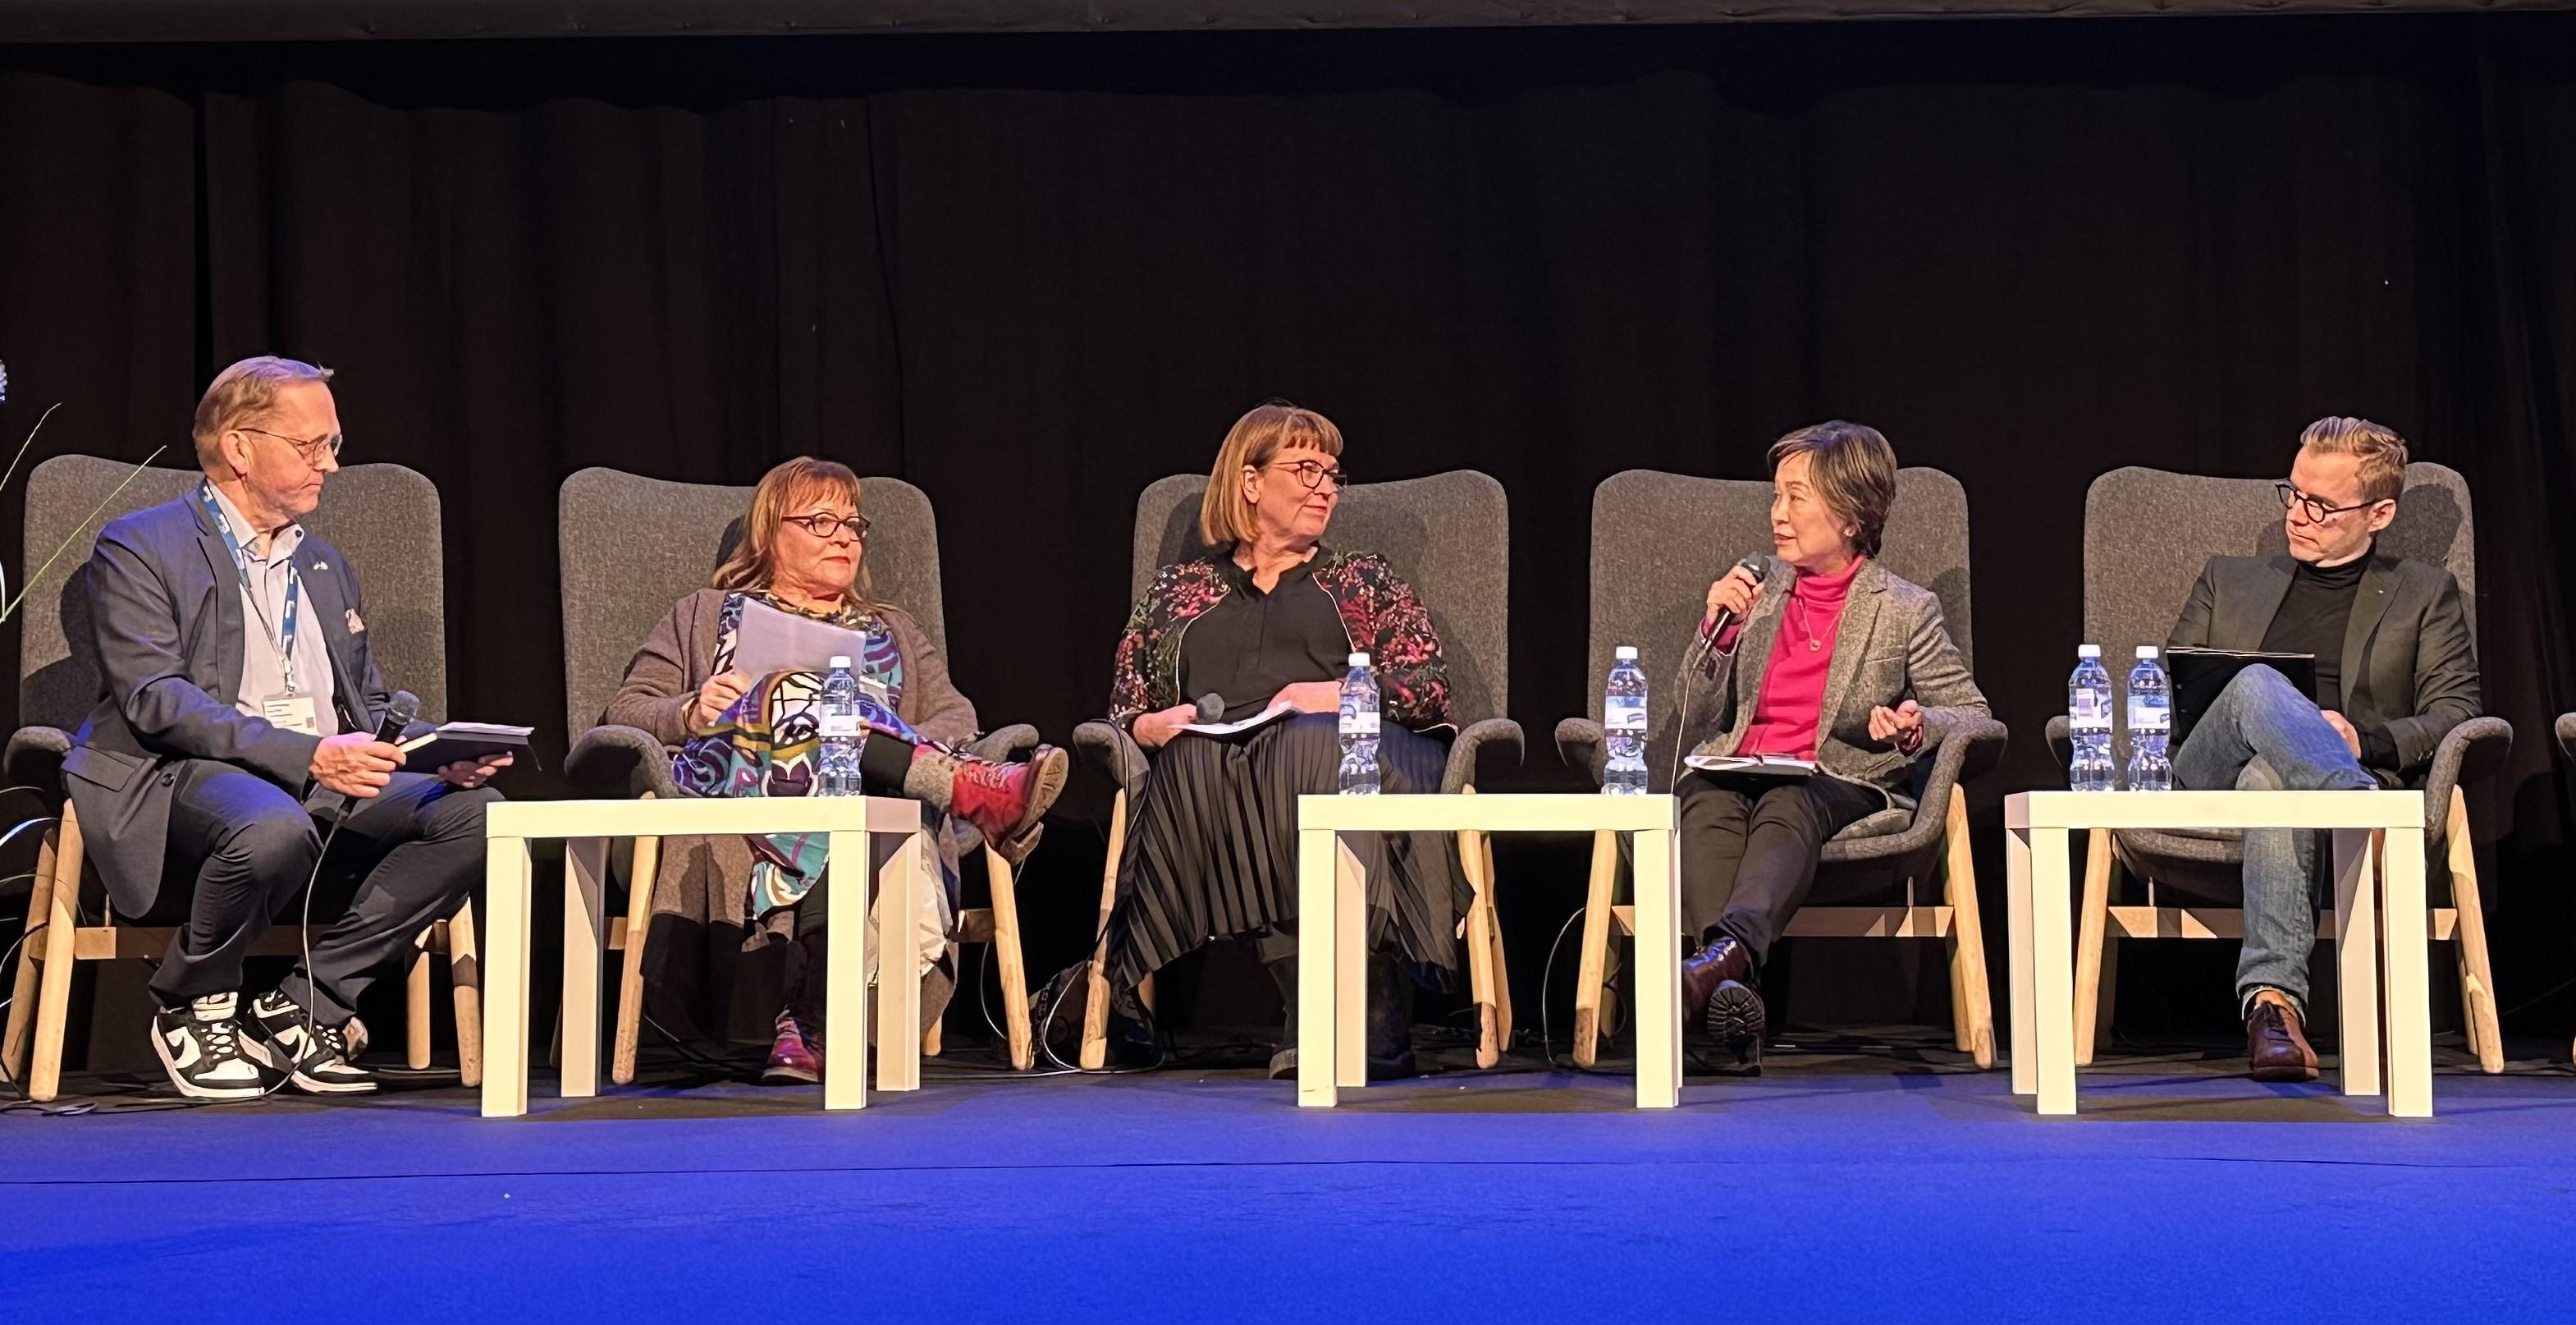 The Secretary for Education, Dr Choi Yuk-lin, attended the Educa, an education exhibition, in Helsinki, Finland, on January 26 (Helsinki time). Photo shows Dr Choi (second right) speaking at a topical discussion with the State Secretary to the Minister of Education of Finland, Ms Mikaela Nylander (centre).